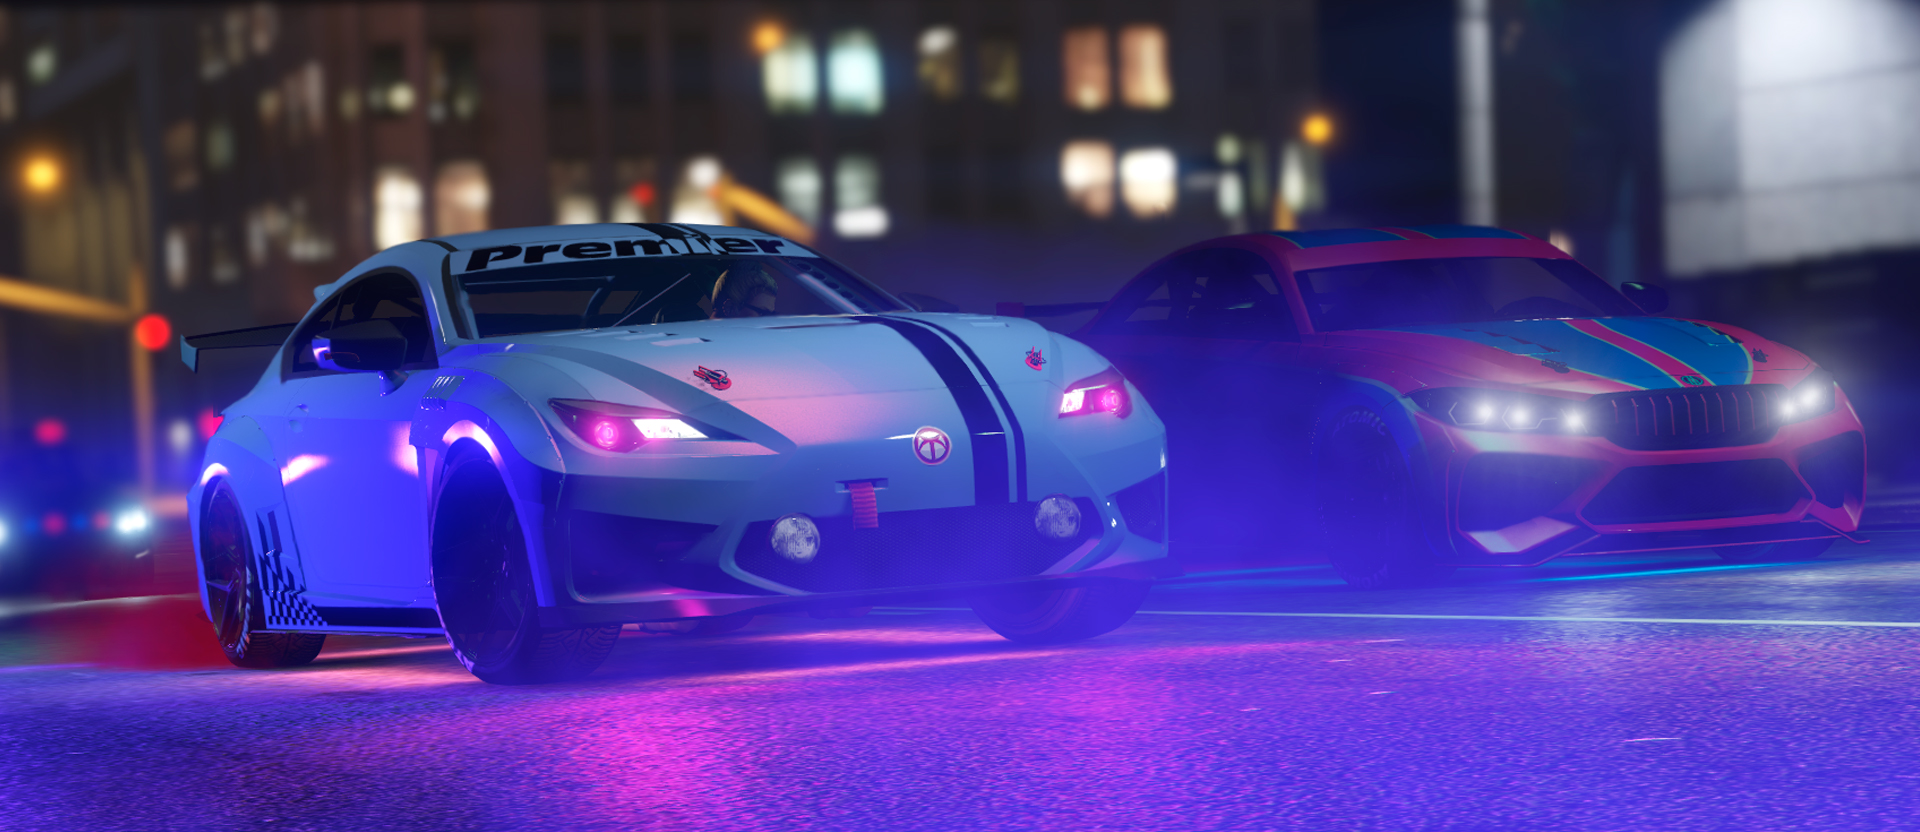 GTA Online's Los Santos Tuners Update Is All About Cars, Launches